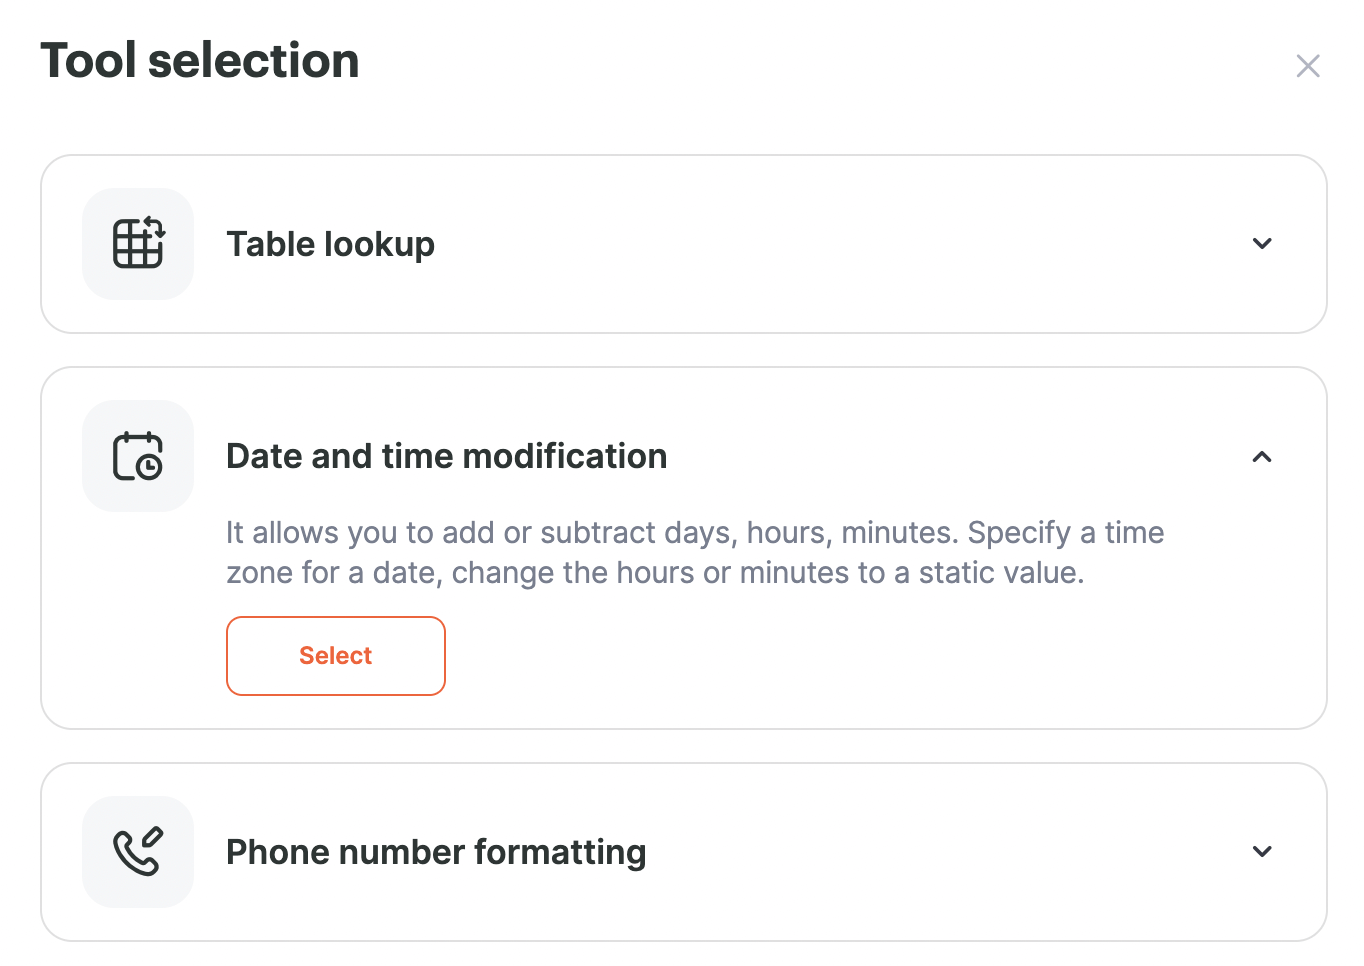 The date and time modification tool in the Tool selection menu